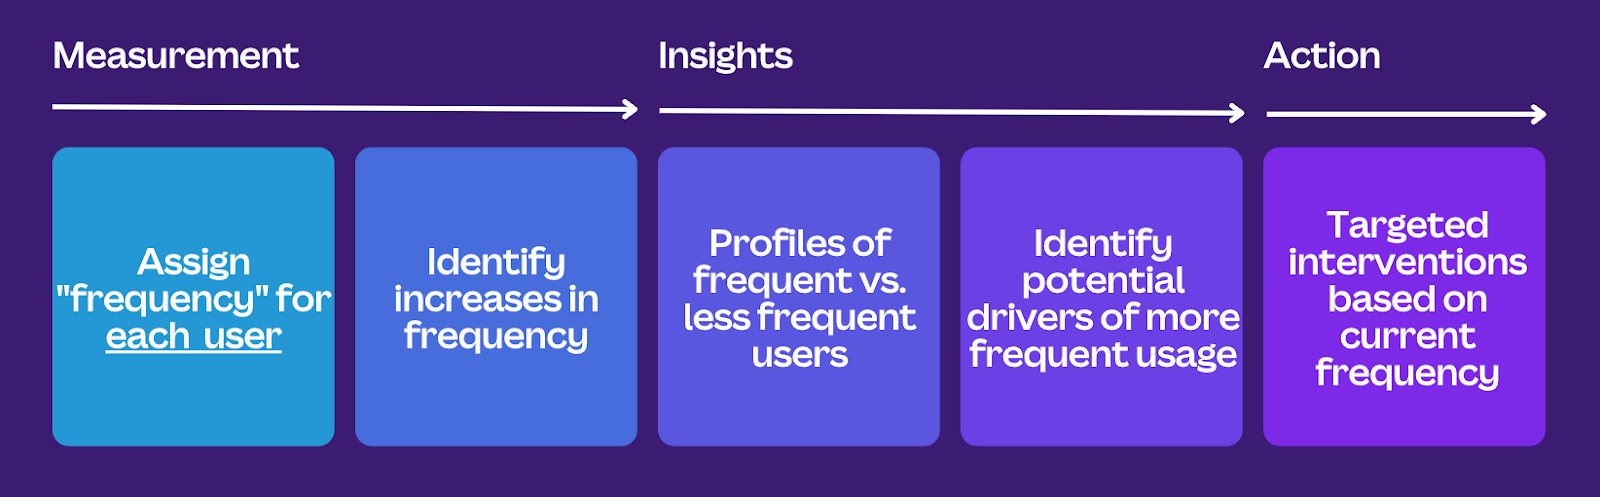 Analytics opportunities funnel. We start by assigning frequency for each user and identifying increases in frequency, then explore potential drivers of more frequent usage, and finally target interventions based on each user's current frequency.